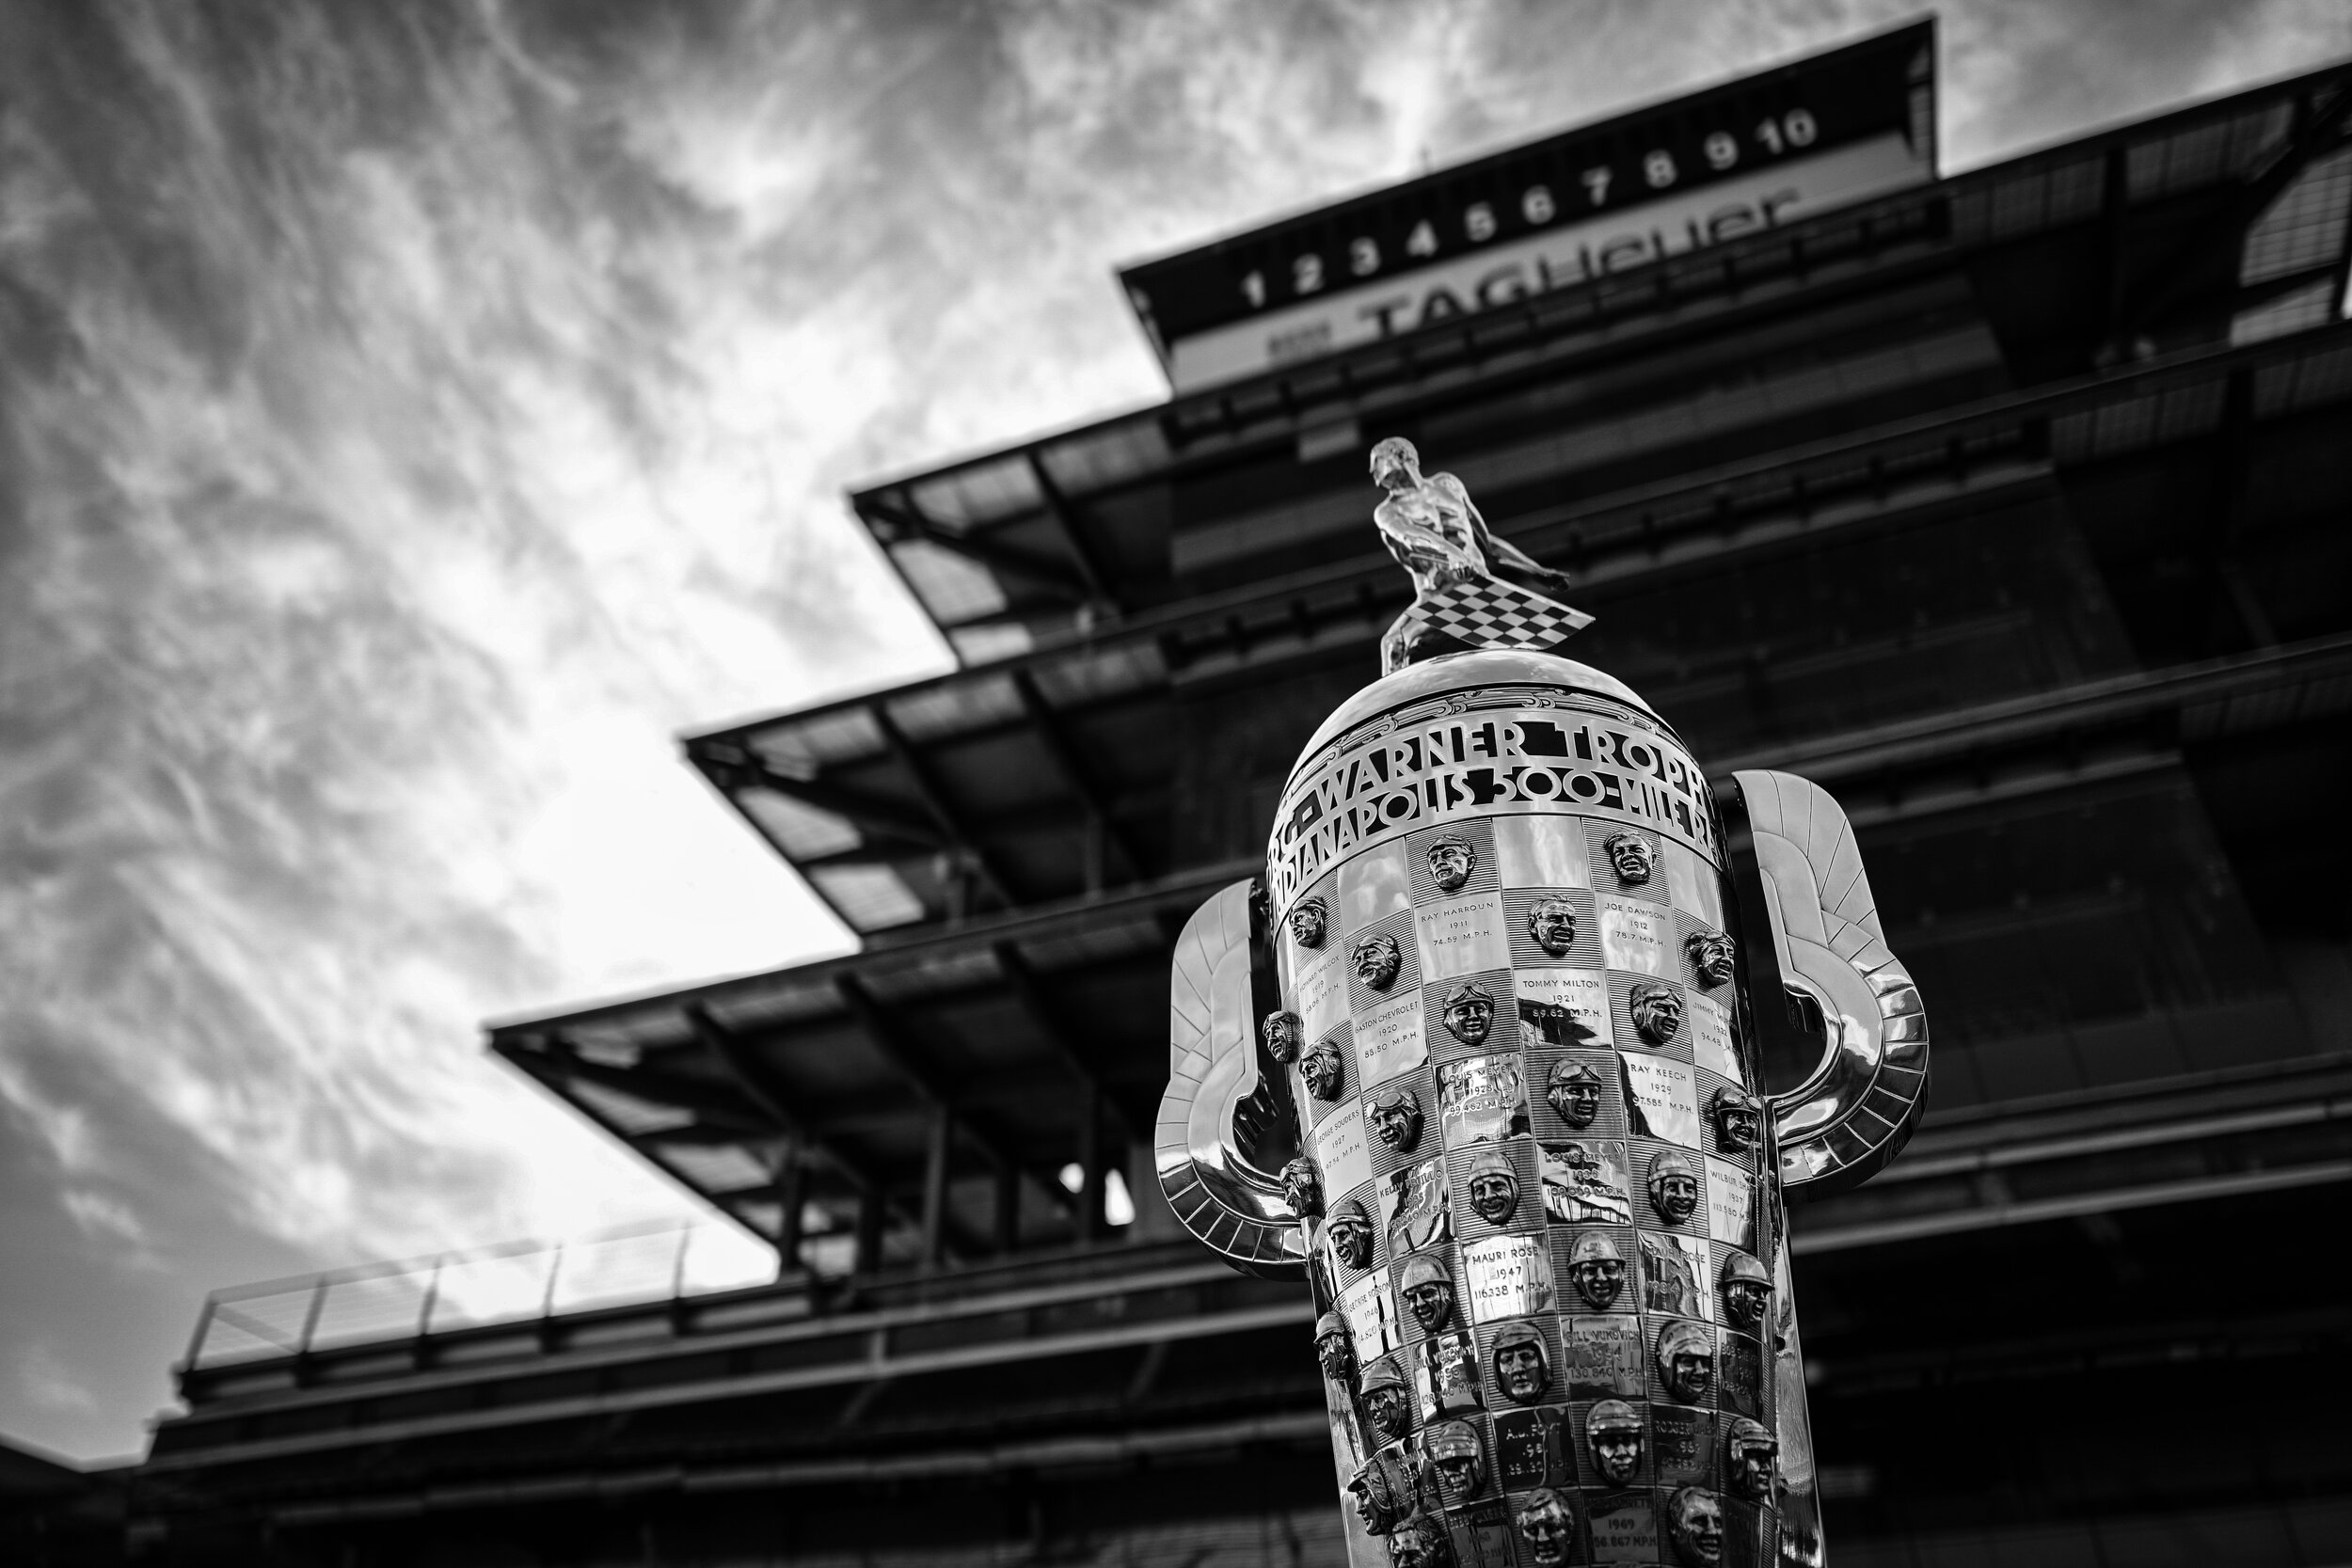 In all it's beauty, the Borg Warner Trophy before scheduled 500 race time.  